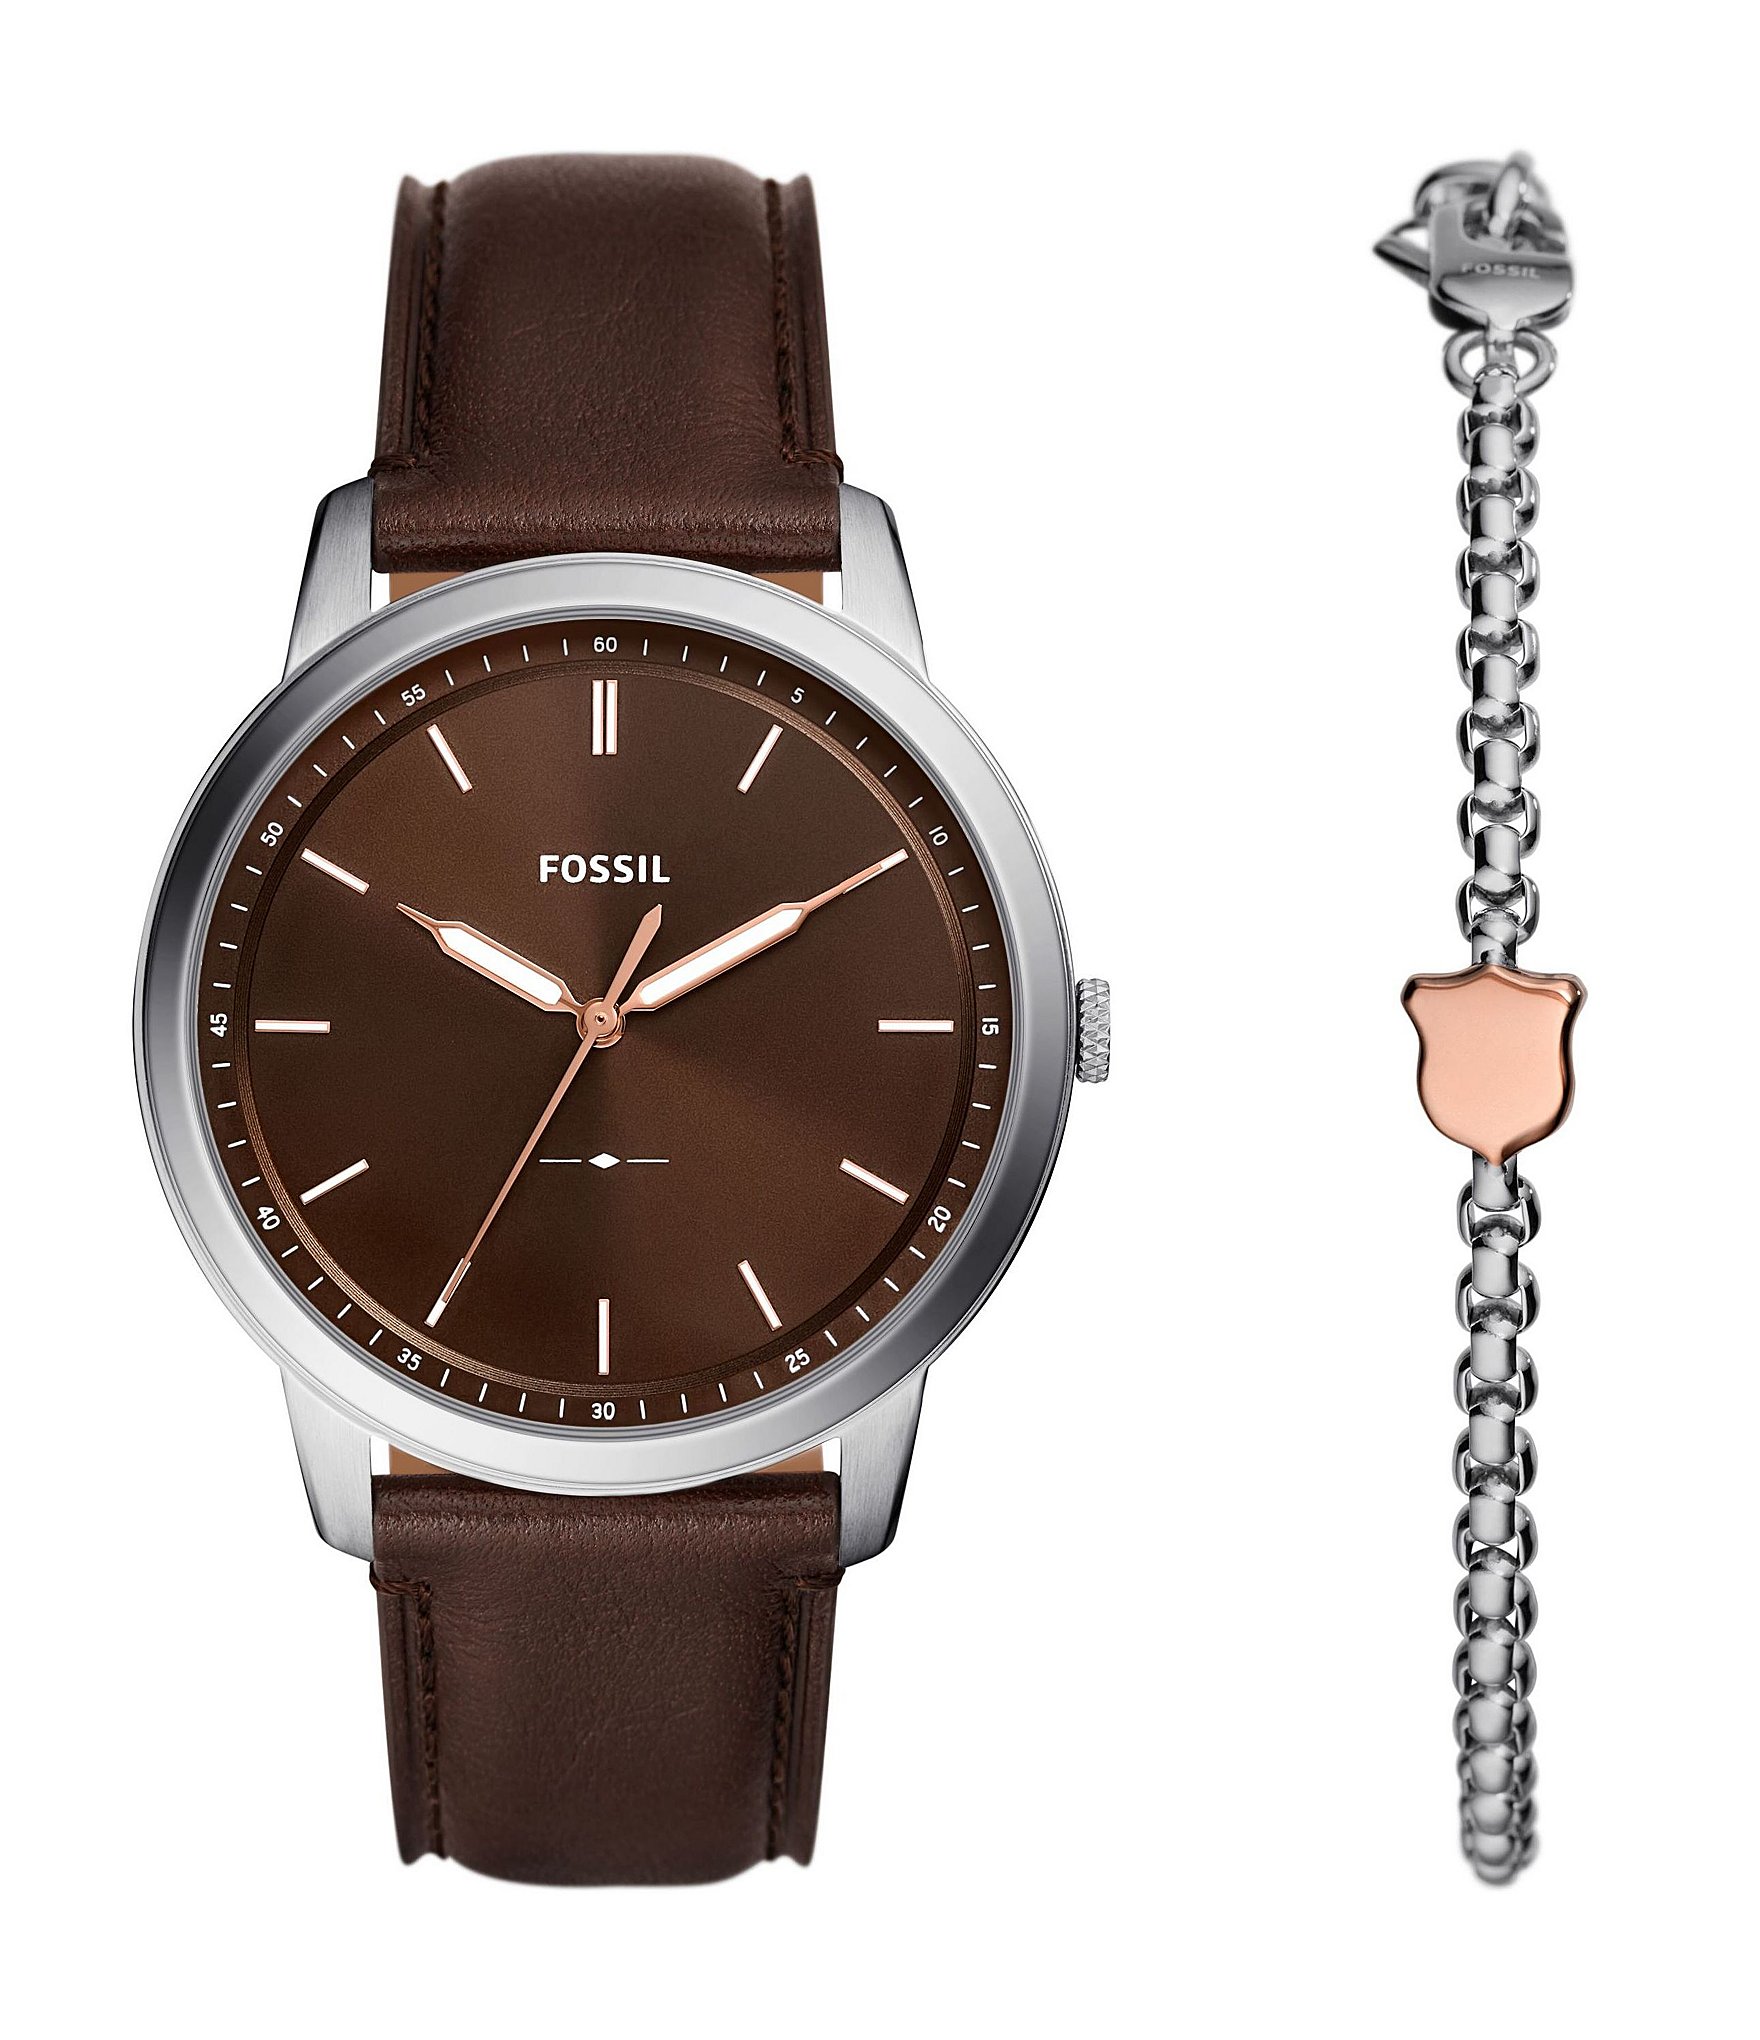 Fossil Men's Townsman Chronograph, Brown Leather Strap Watch, 44mm and  Bracelet Set | Hawthorn Mall